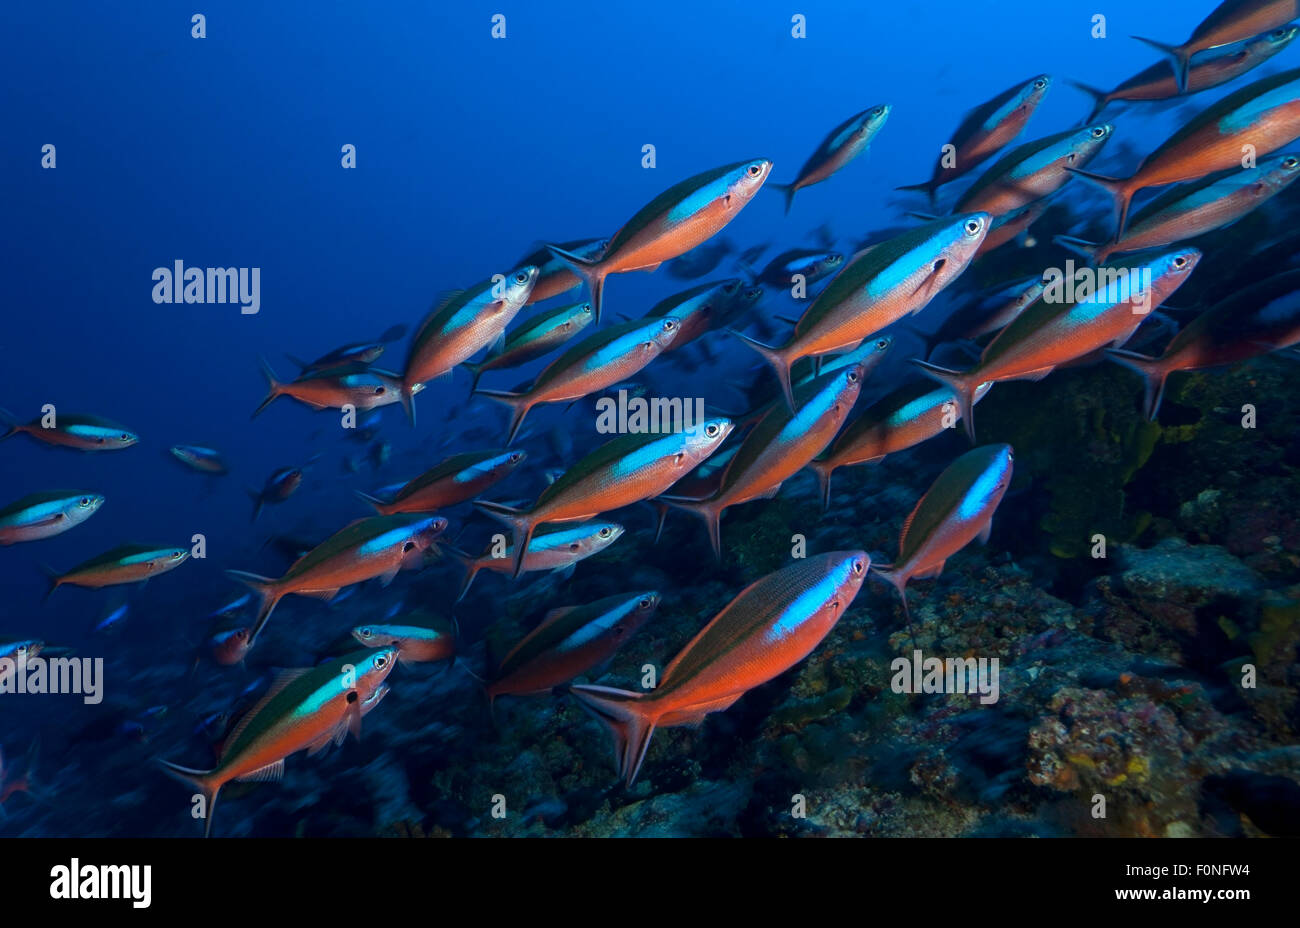 BIG SCHOOL OF FUSILIER SWIMMING CLOSE TO CORAL REEF Stock Photo